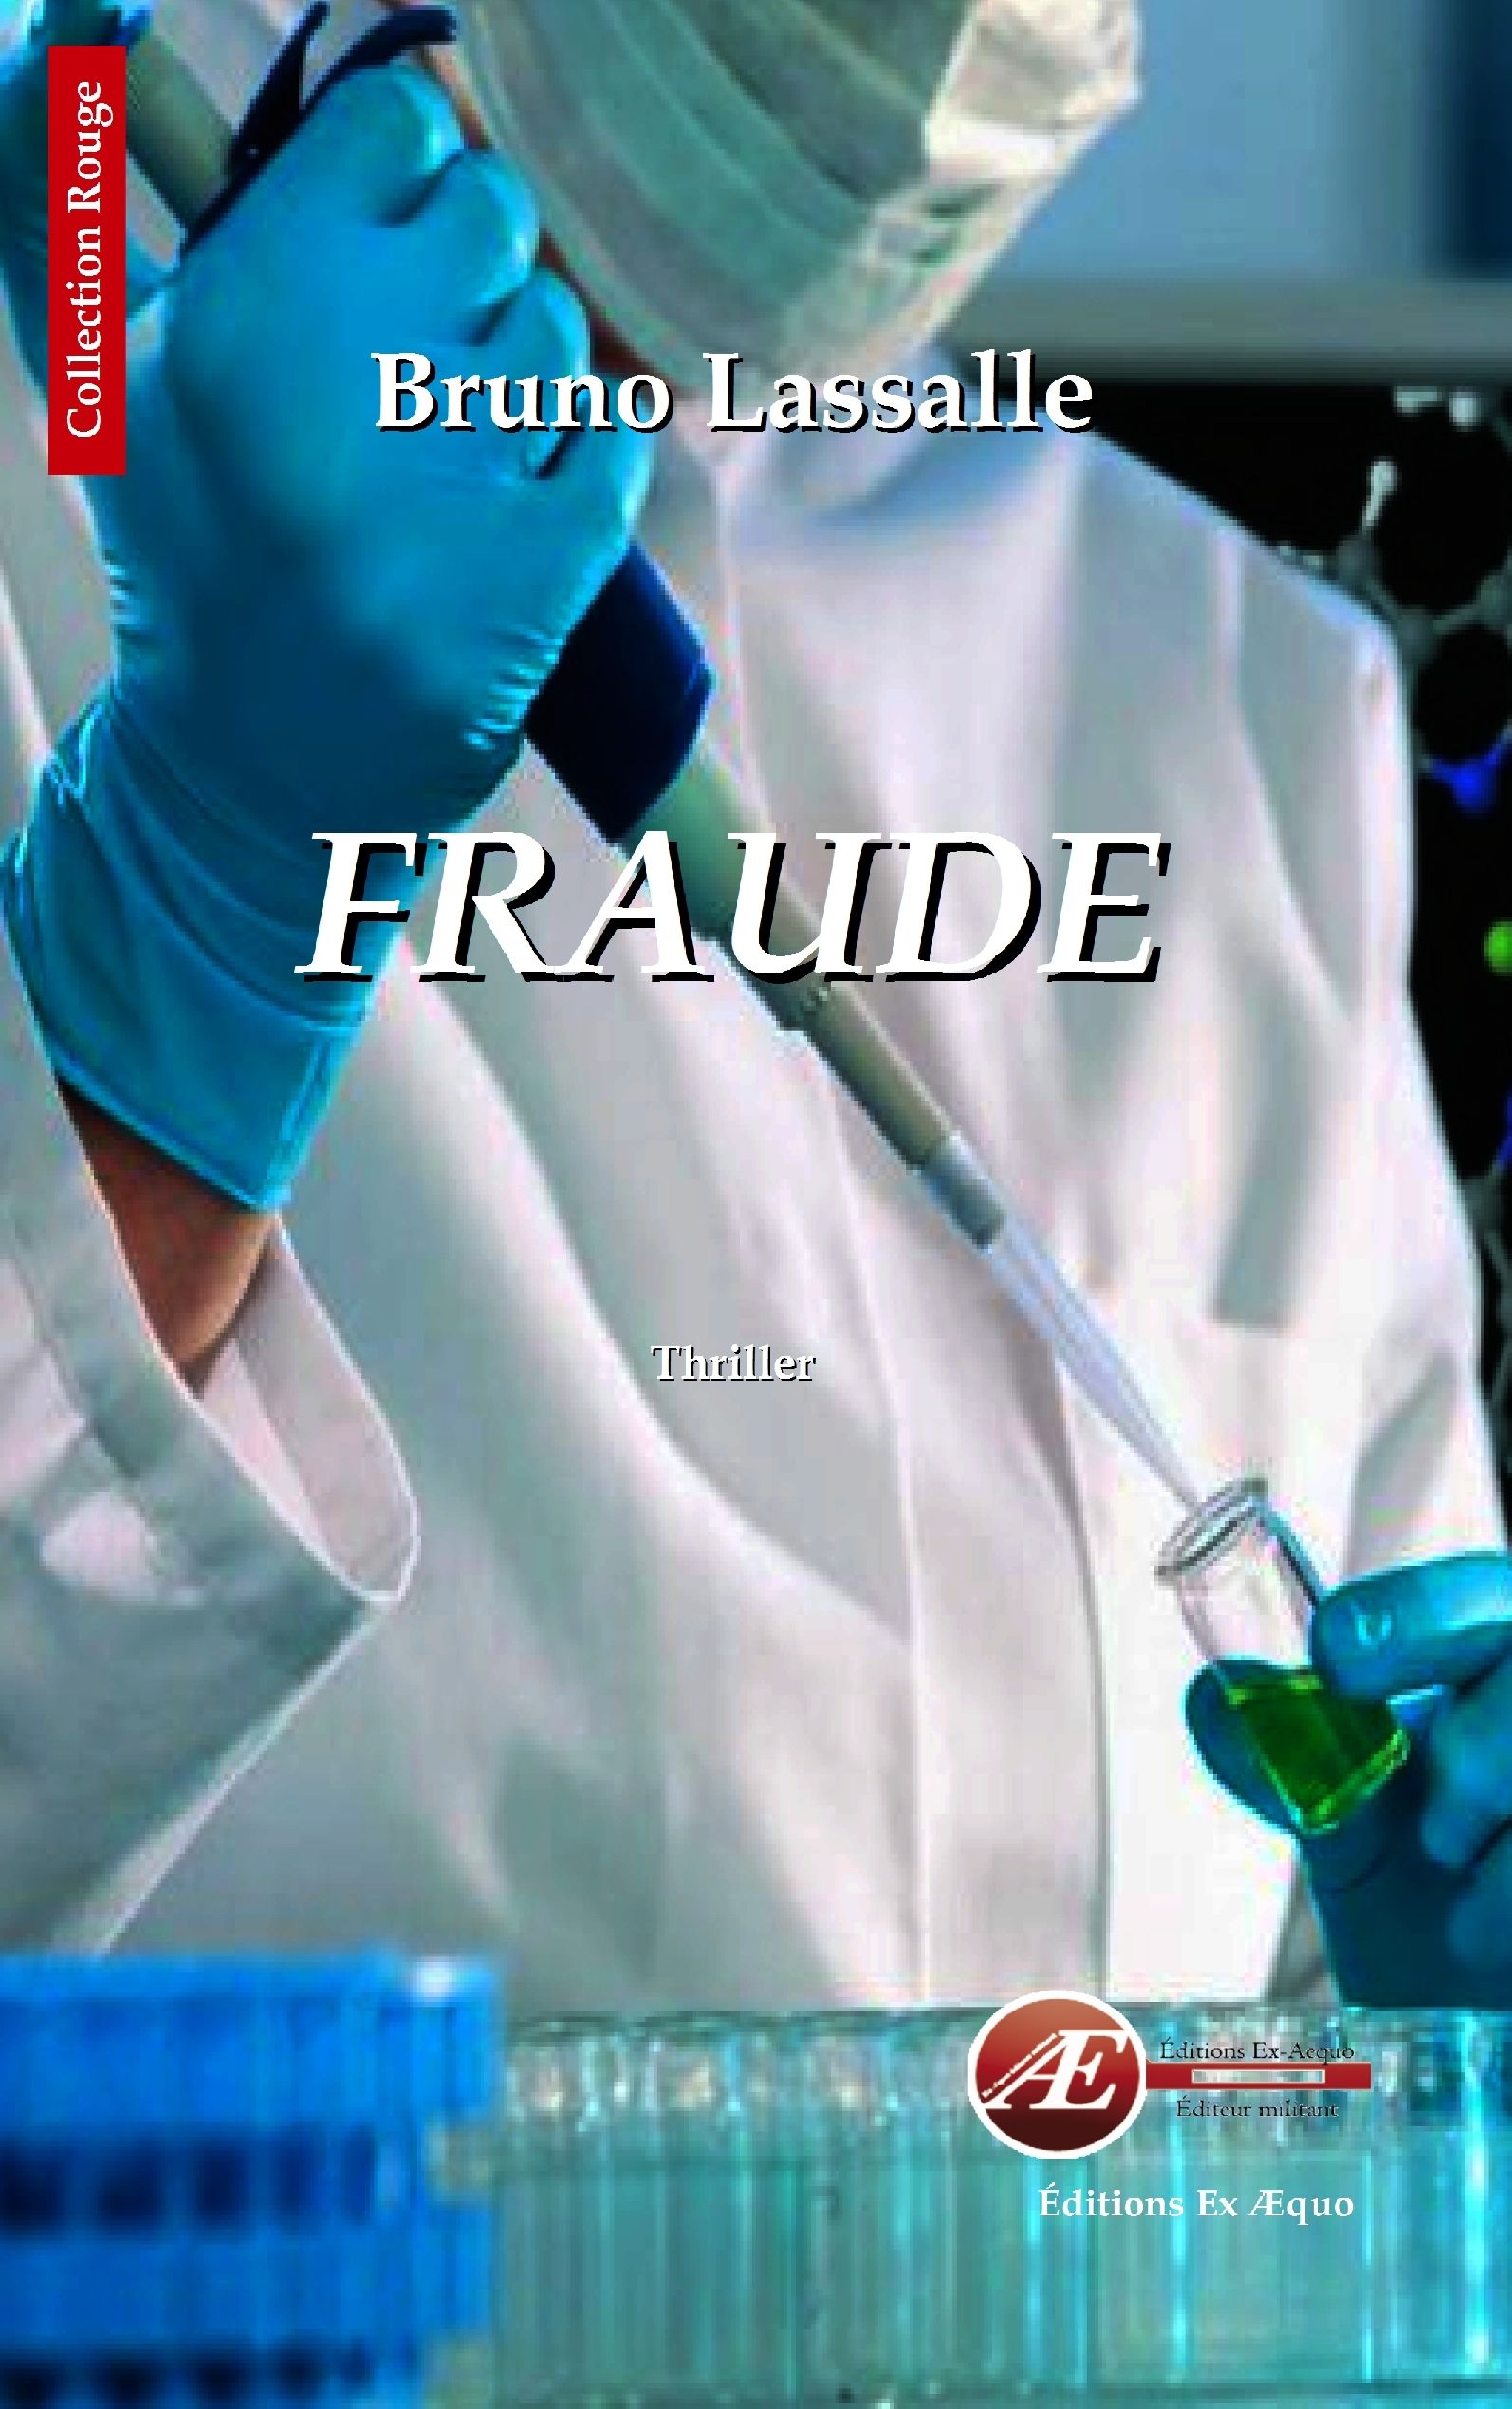 You are currently viewing Fraude, de Bruno Lassalle